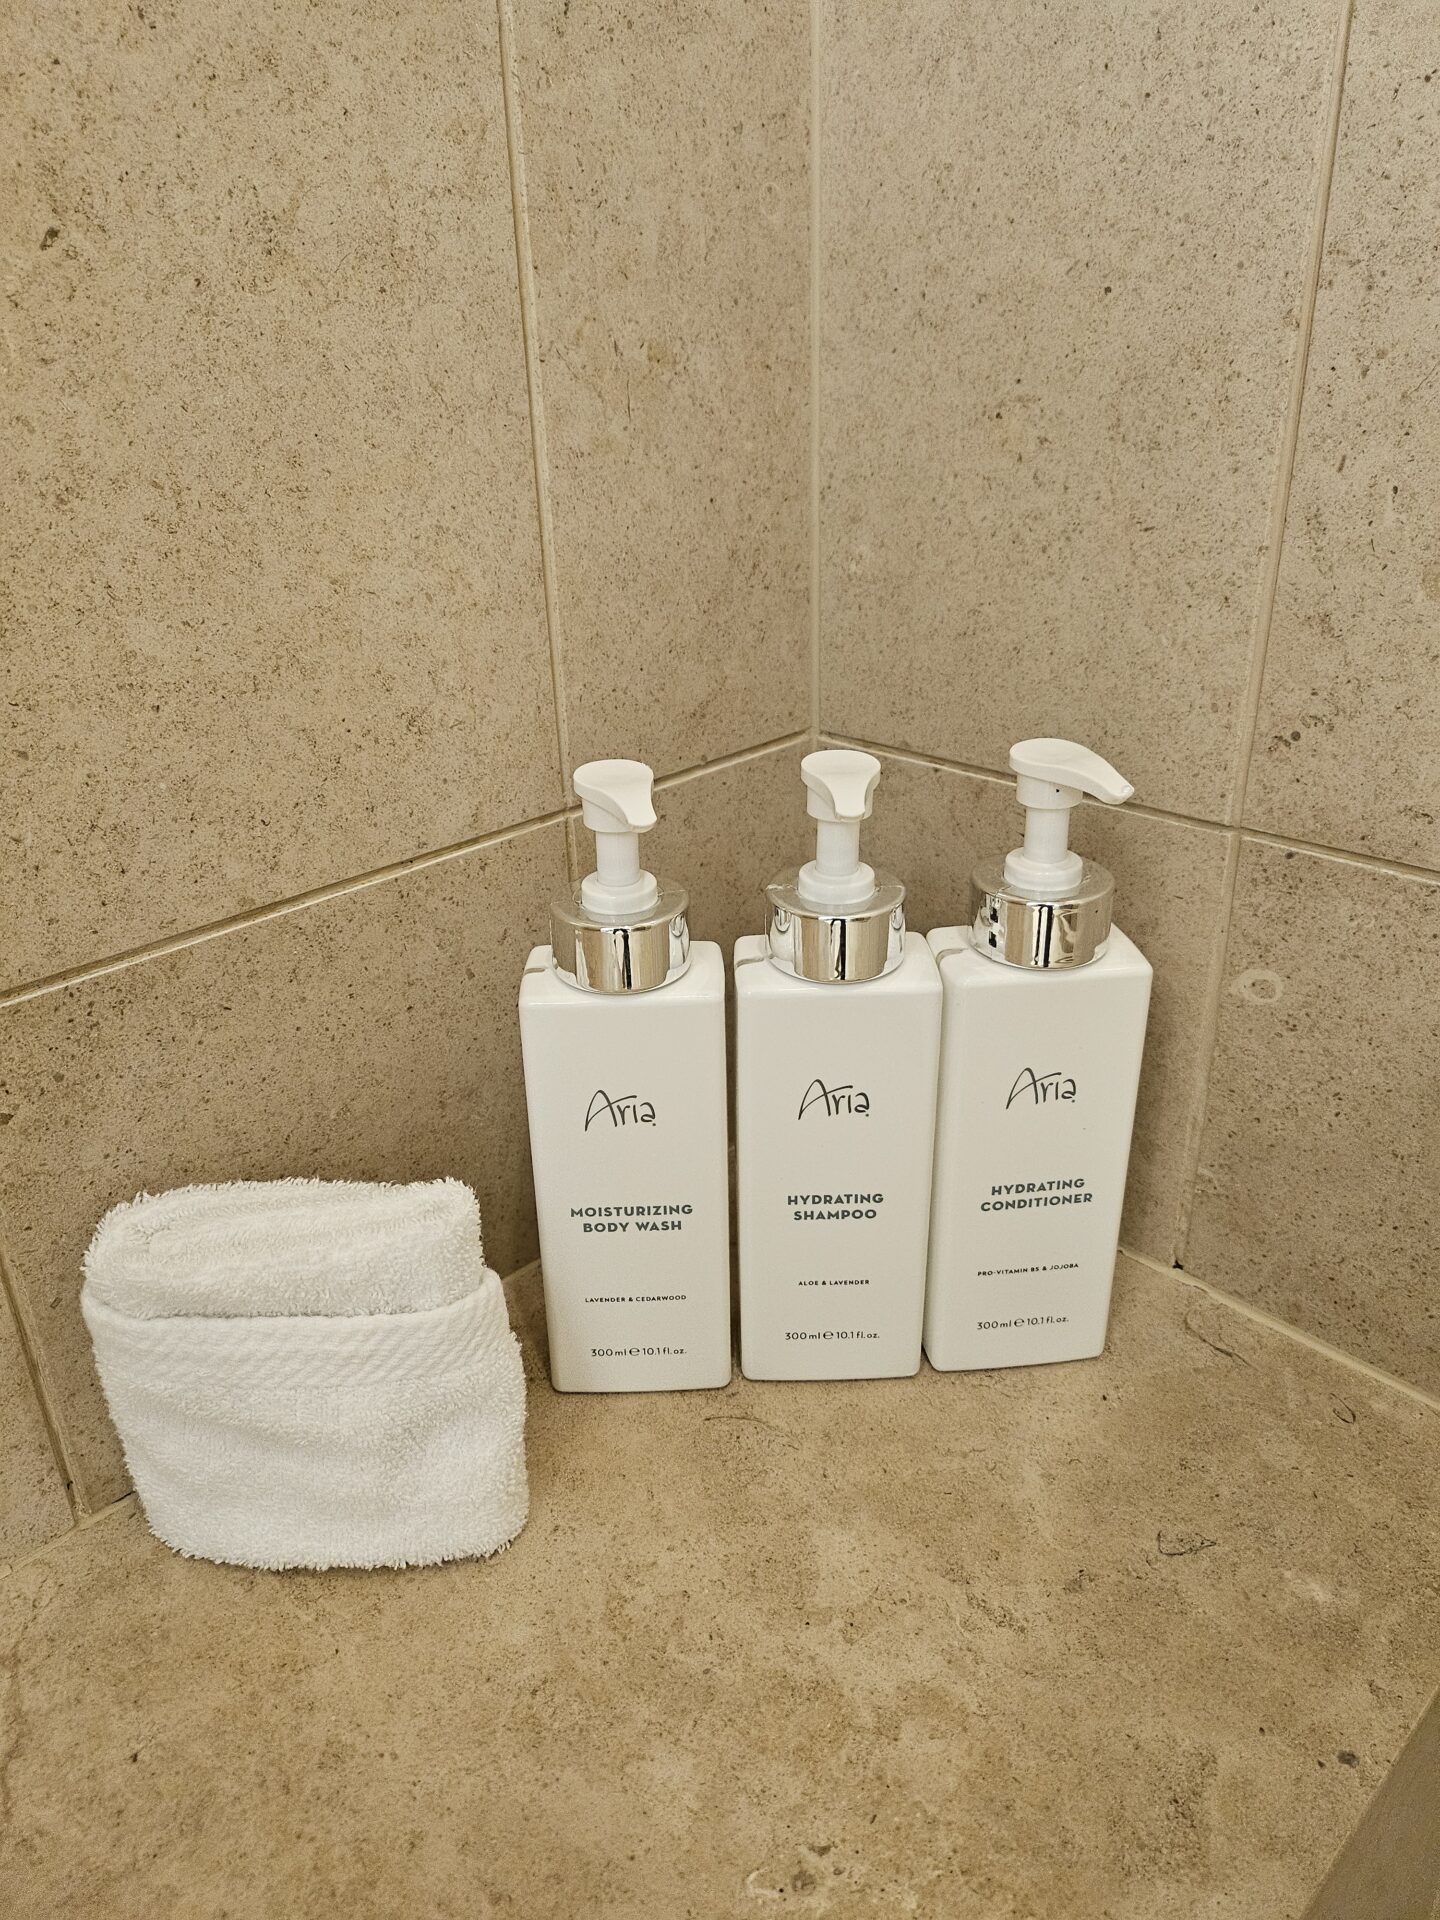 a group of white bottles next to a towel